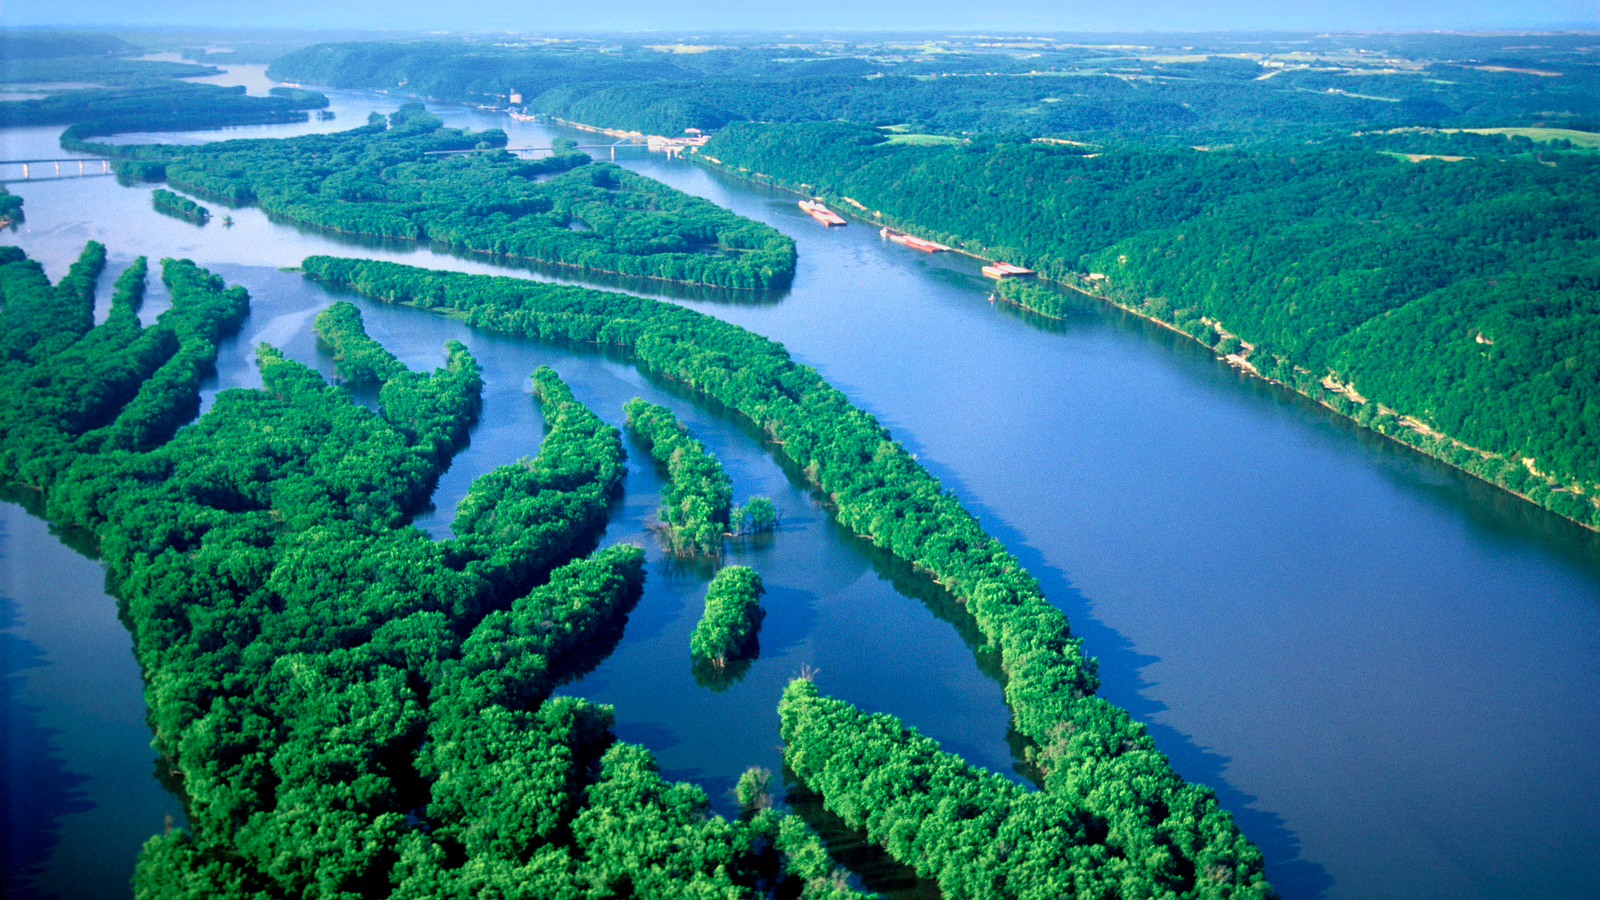 Forested islands create a maze in the Mississippi River near Iowa. Photo © Robert J. Hurt